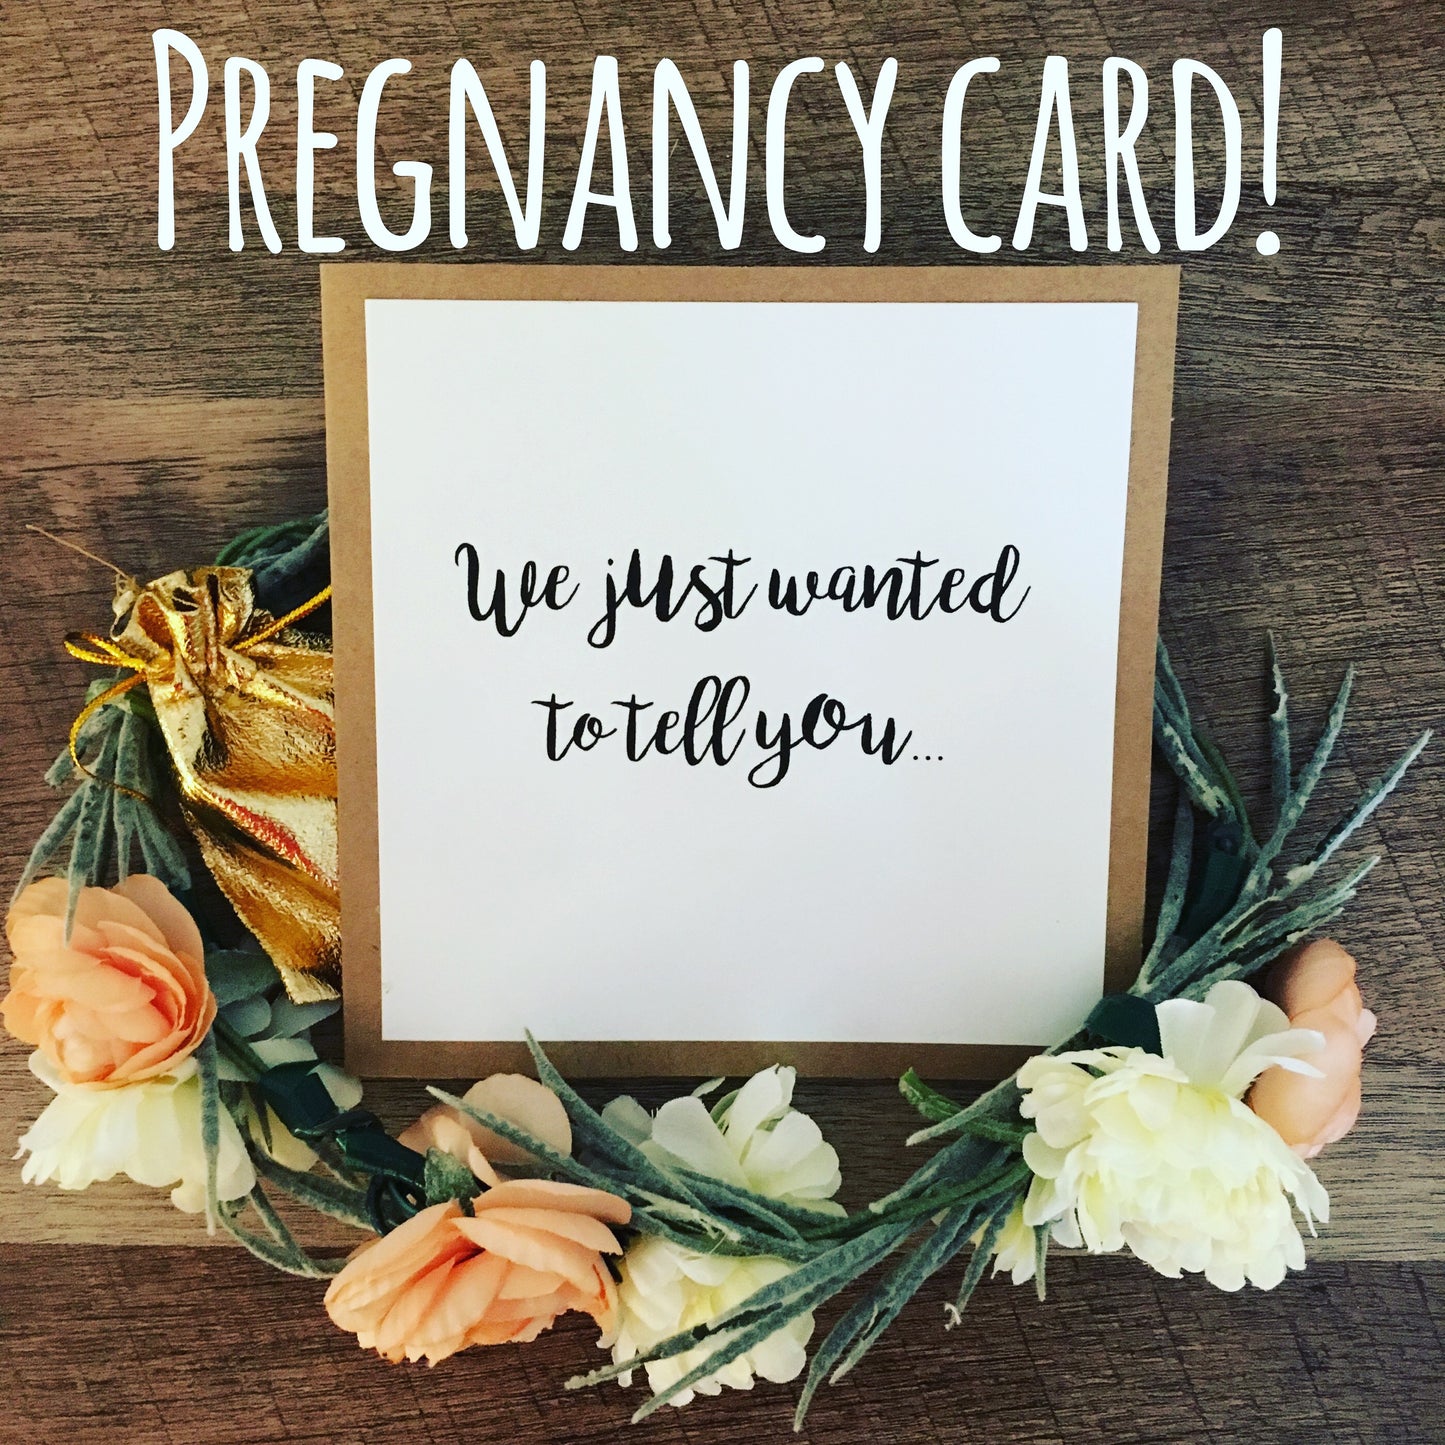 Pregnancy Card! Add Your Own Photo